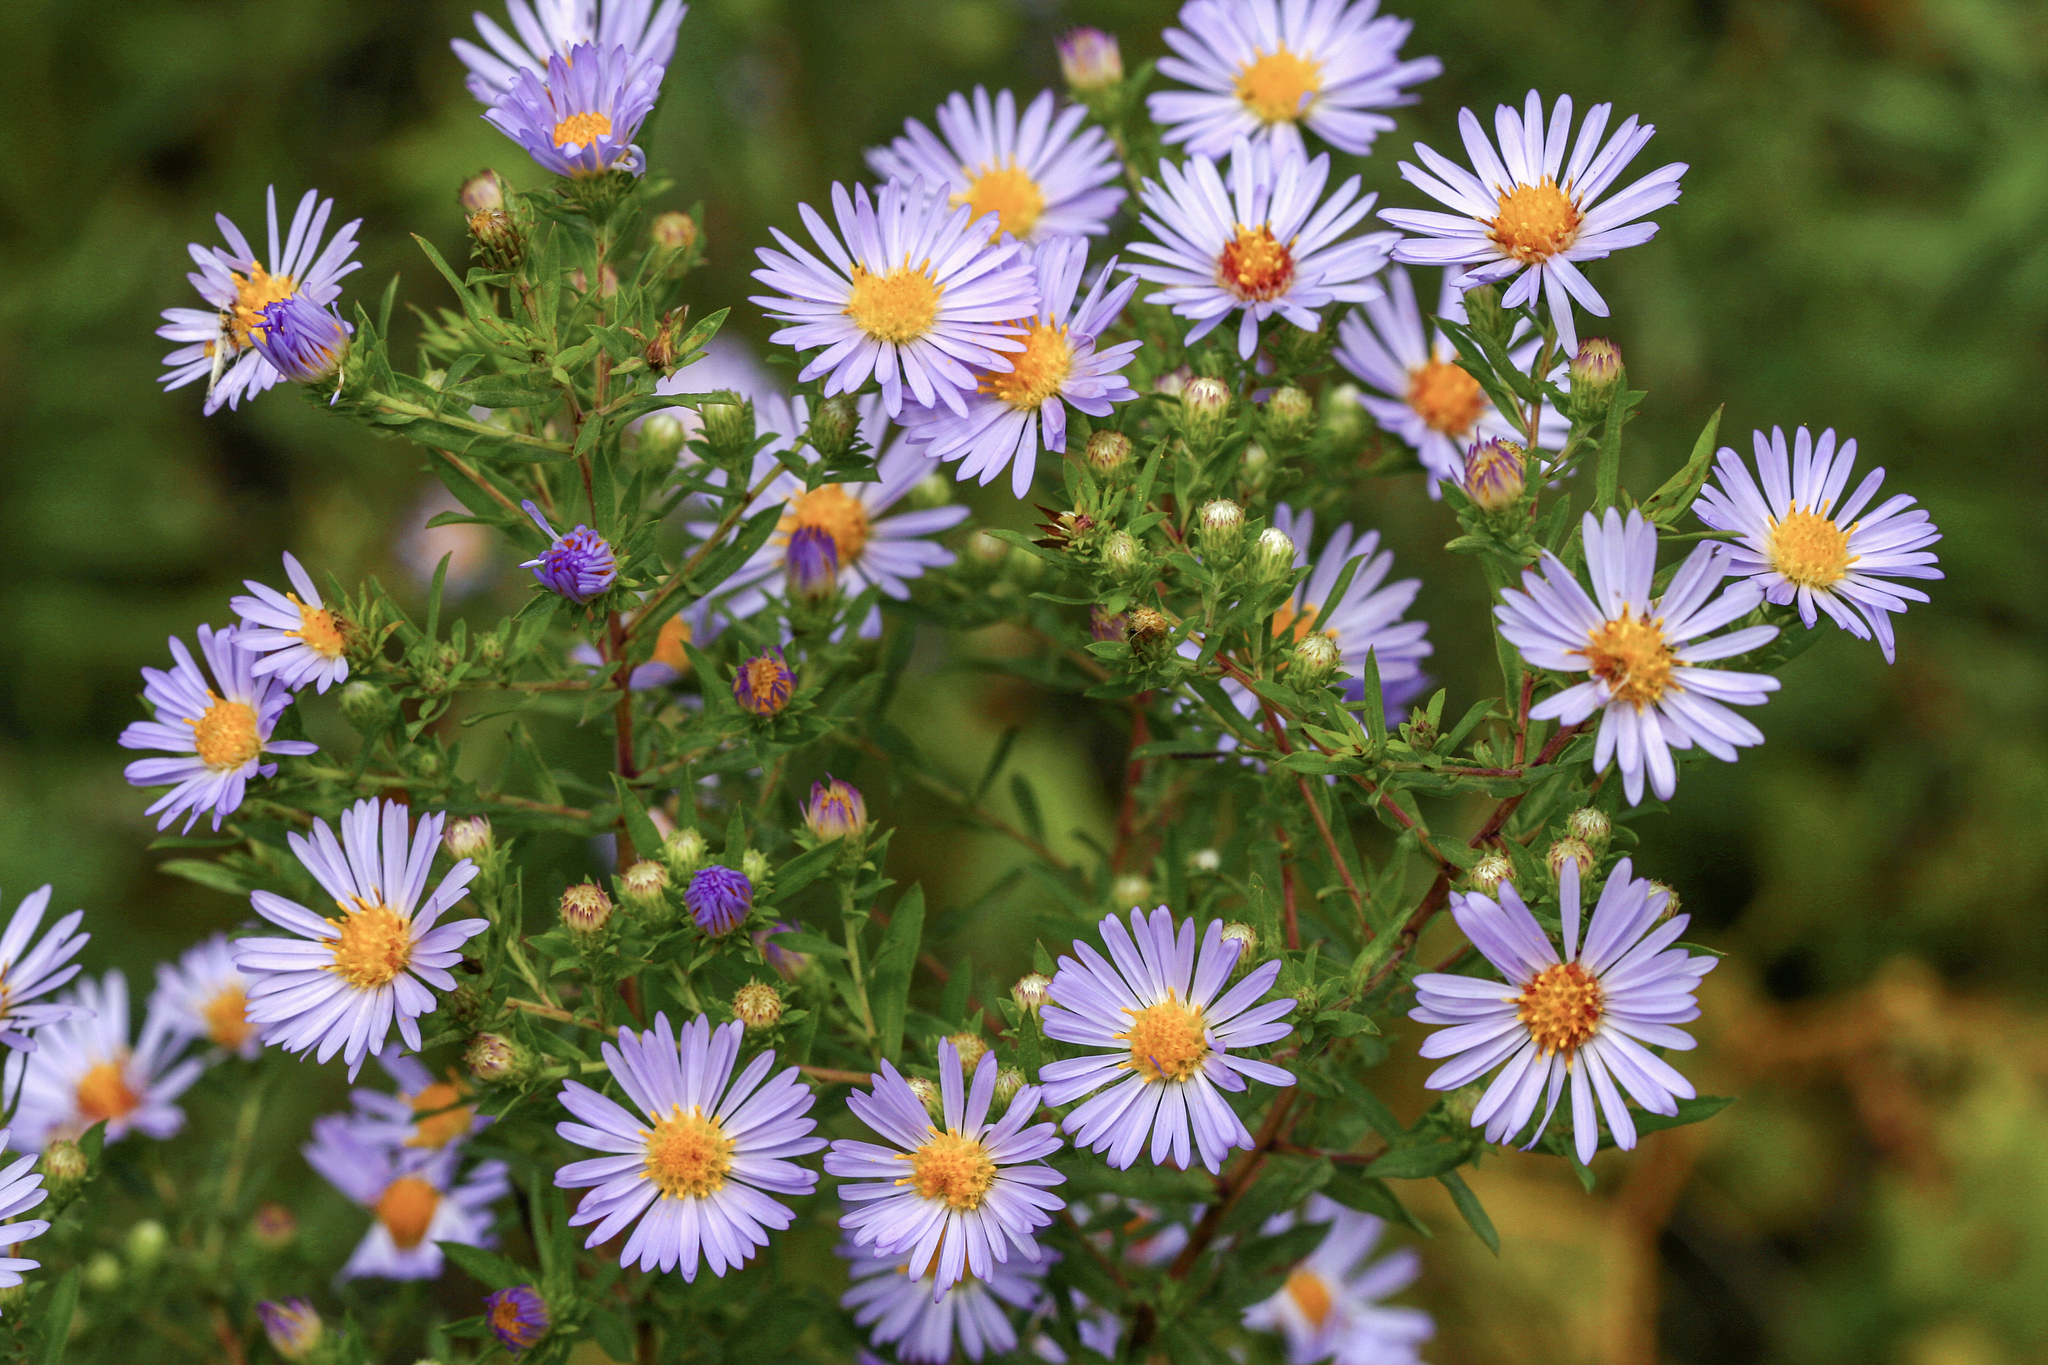 A photograph of the Willowleaf Aster